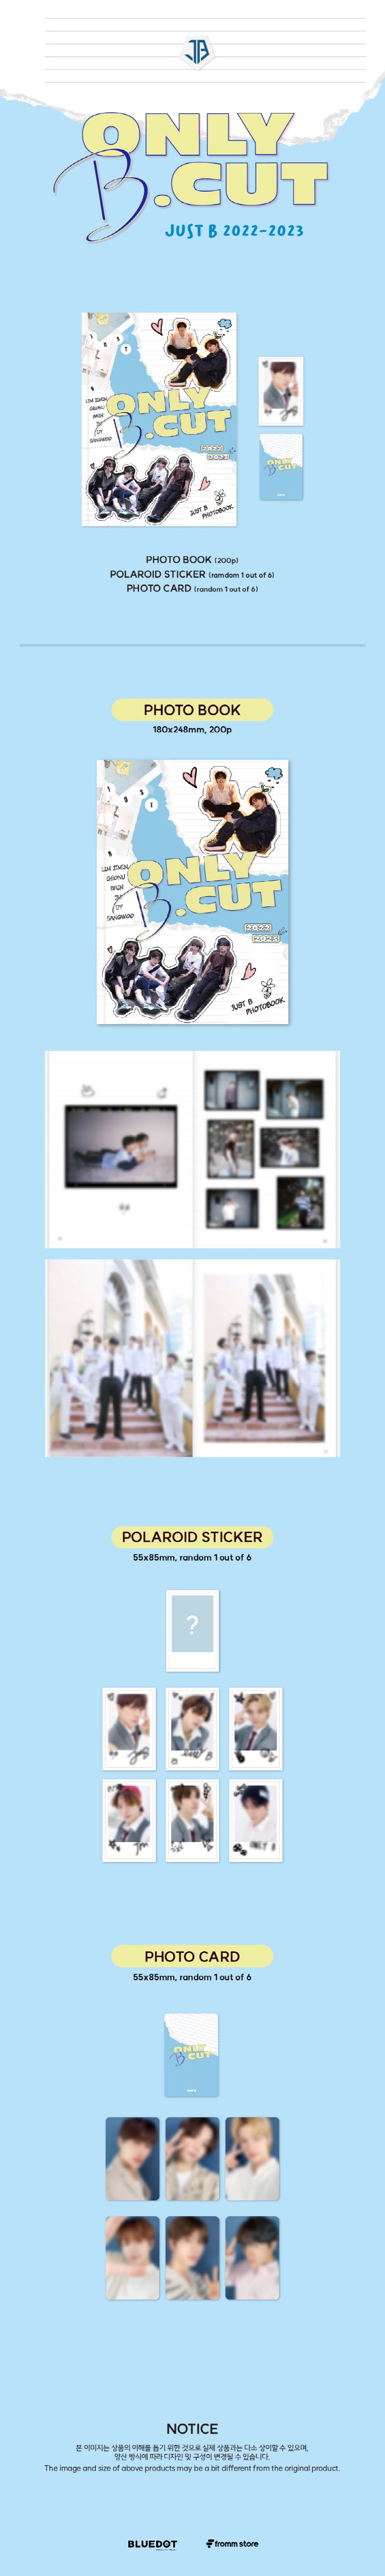 [Product composition] PHOTO BOOK / POLAROID STICKER / PHOTO CARD *Weight: About 1kg [product specifications] PHOTO BOOK : ...